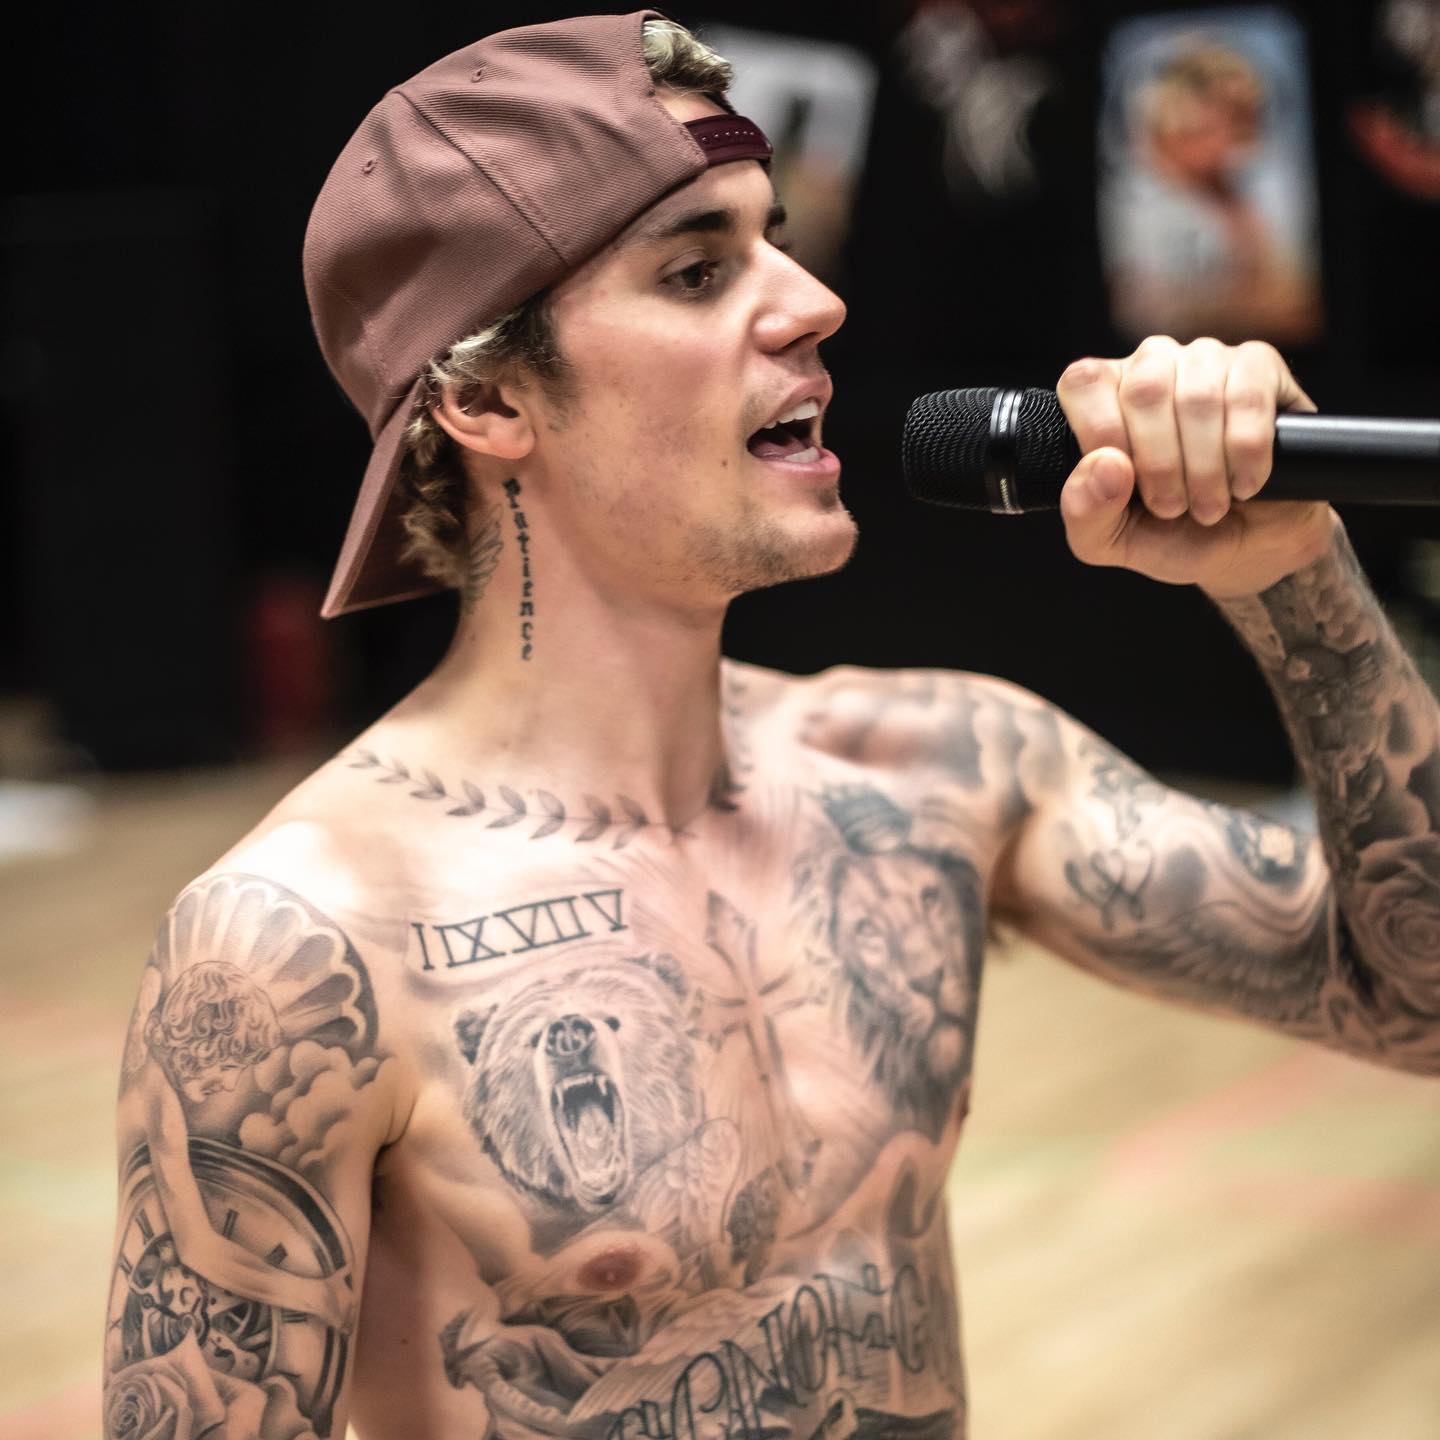 Justin Biebers Tattoos  The Meaning Behind Justin Biebers Tattoos